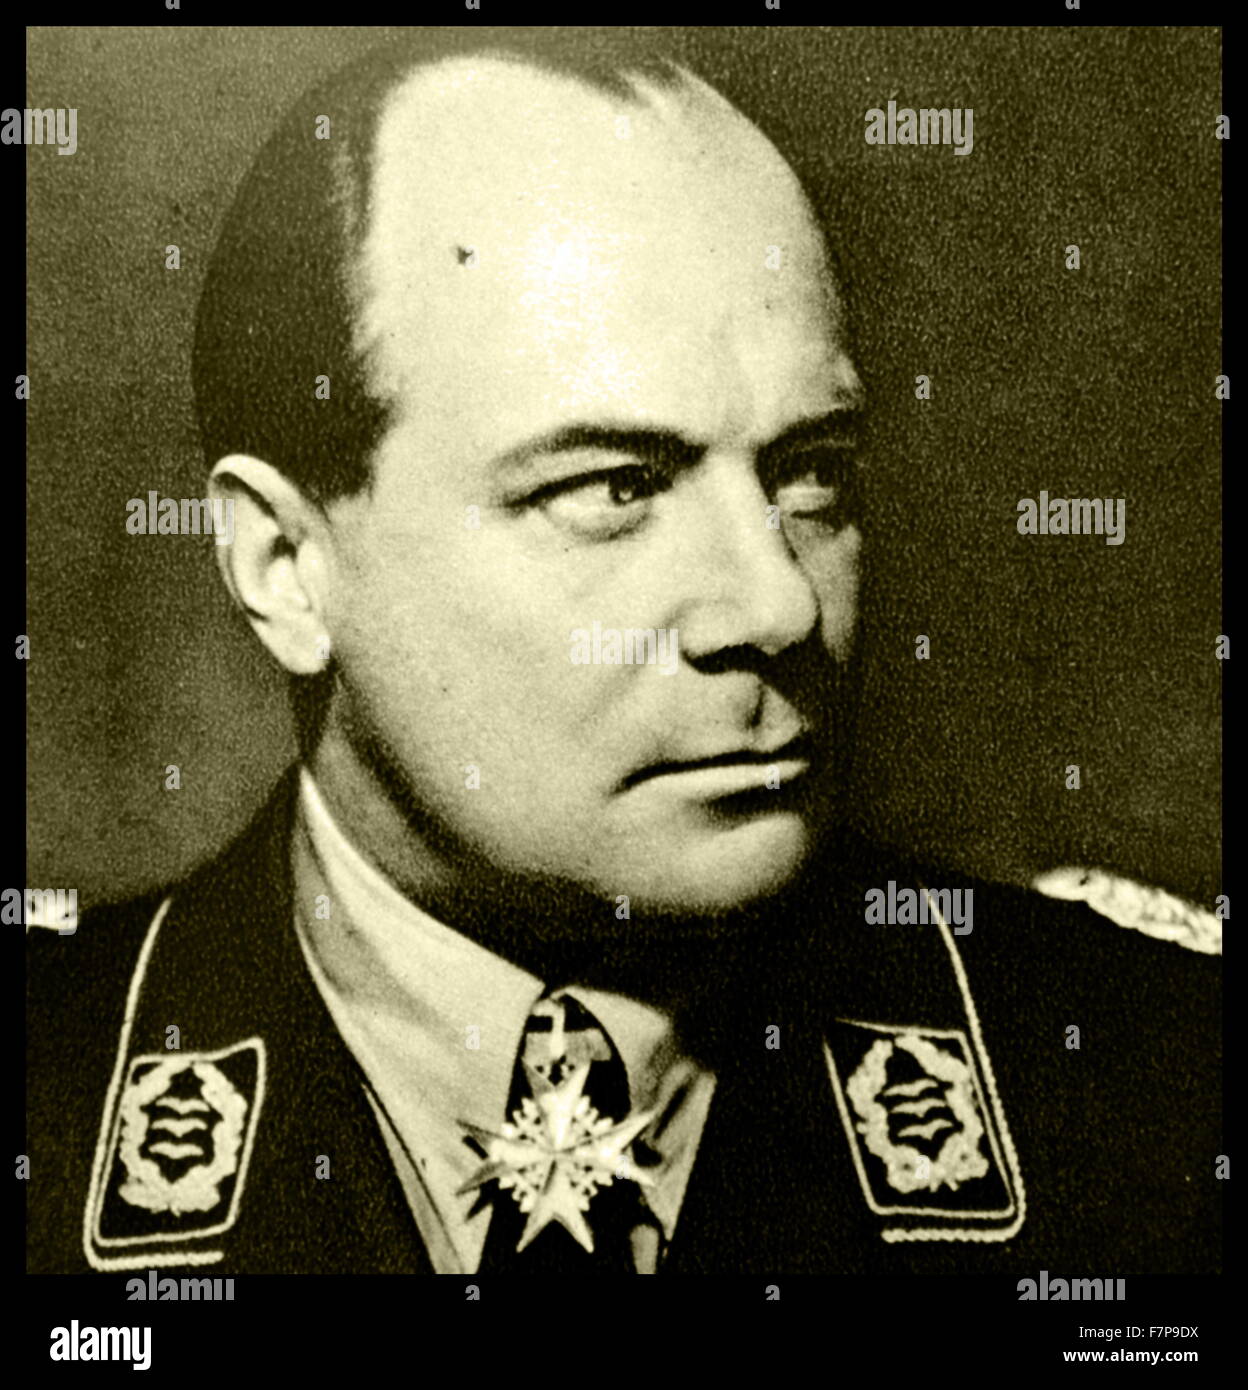 Photograph of Colonel General Ernst Udet (26th April 1896 - 17th November 1941). He was an elite pilot, and was heavily involved in the development of the Nazi 'Luftwaffe' (Airforce) in the 1930's and lead up to World War 2. Stock Photo